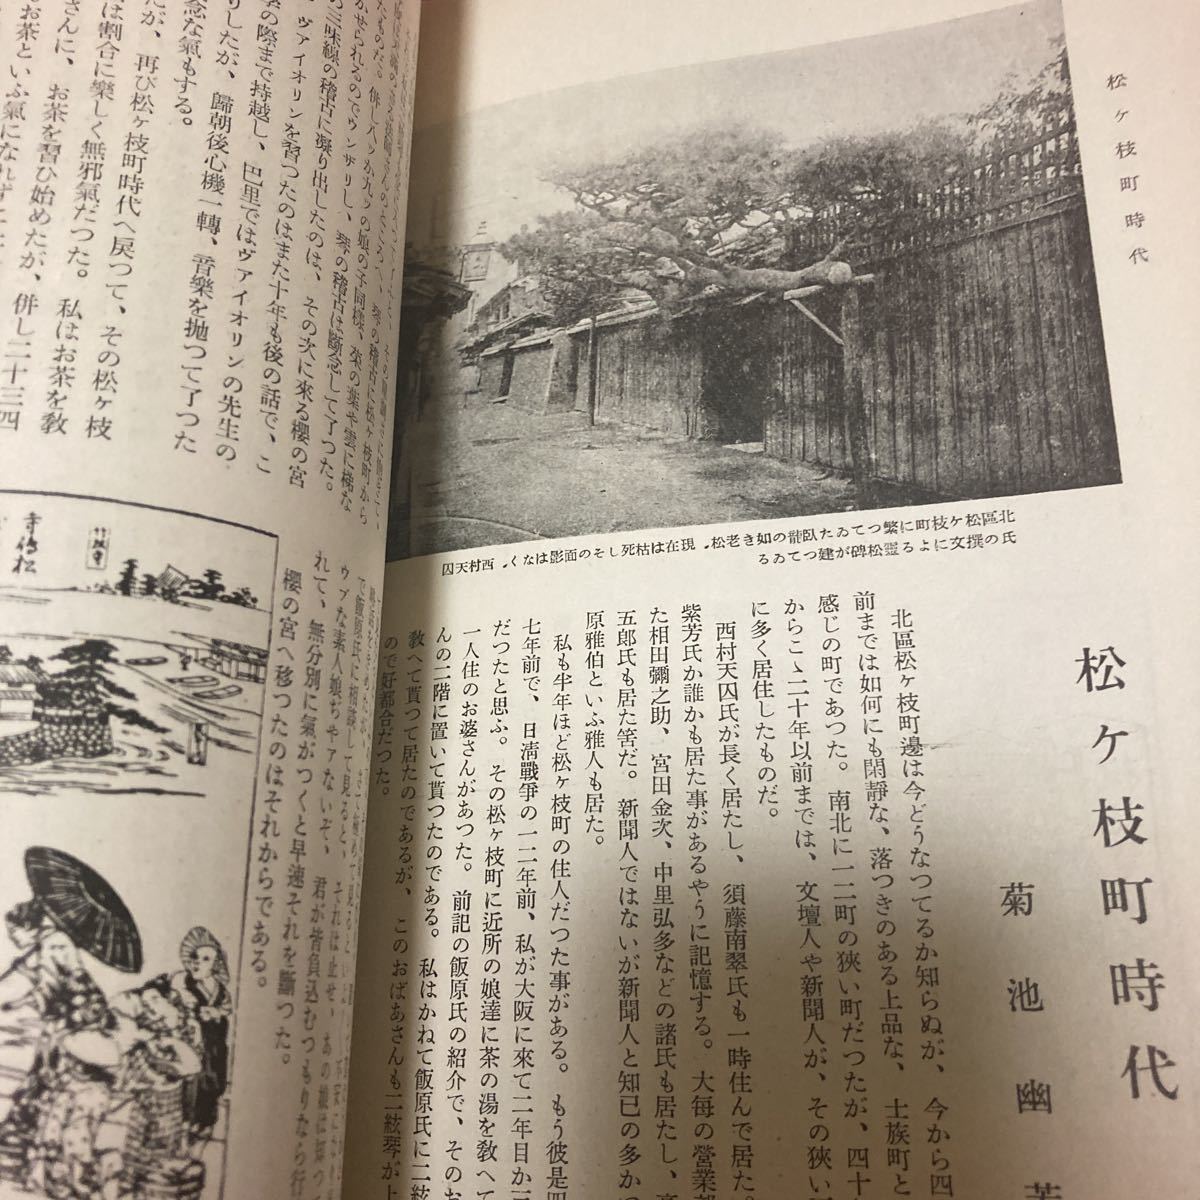 . earth research on person no. 101 number Hasegawa . confidence / woodblock print river bamboo .. Kikuchi .. groove . white ... rainbow ... temple quiet ..book@ water prefecture 